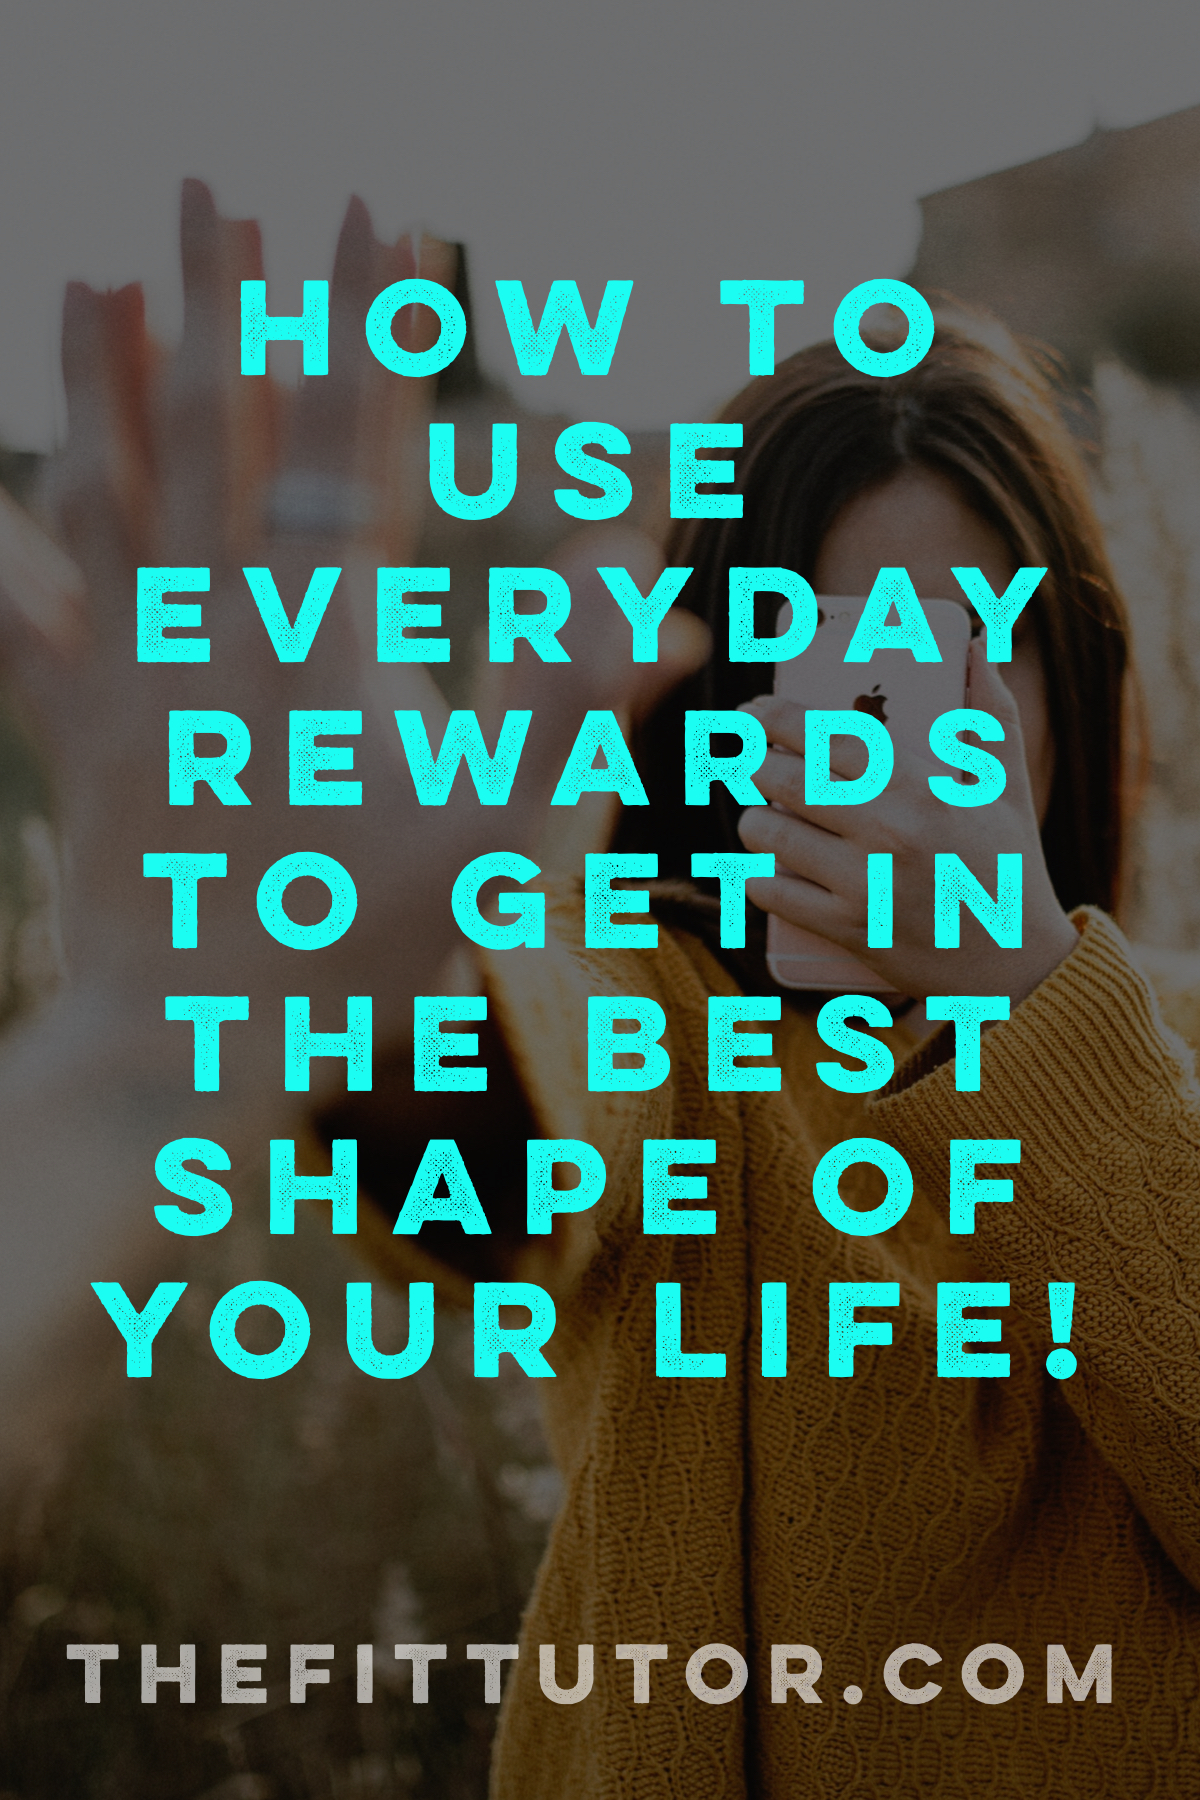 What if you harnessed your social media addiction, love for games or online debates, or heck- even your netflix habit for GOOD? :) Learn how to use rewards to get in great shape!